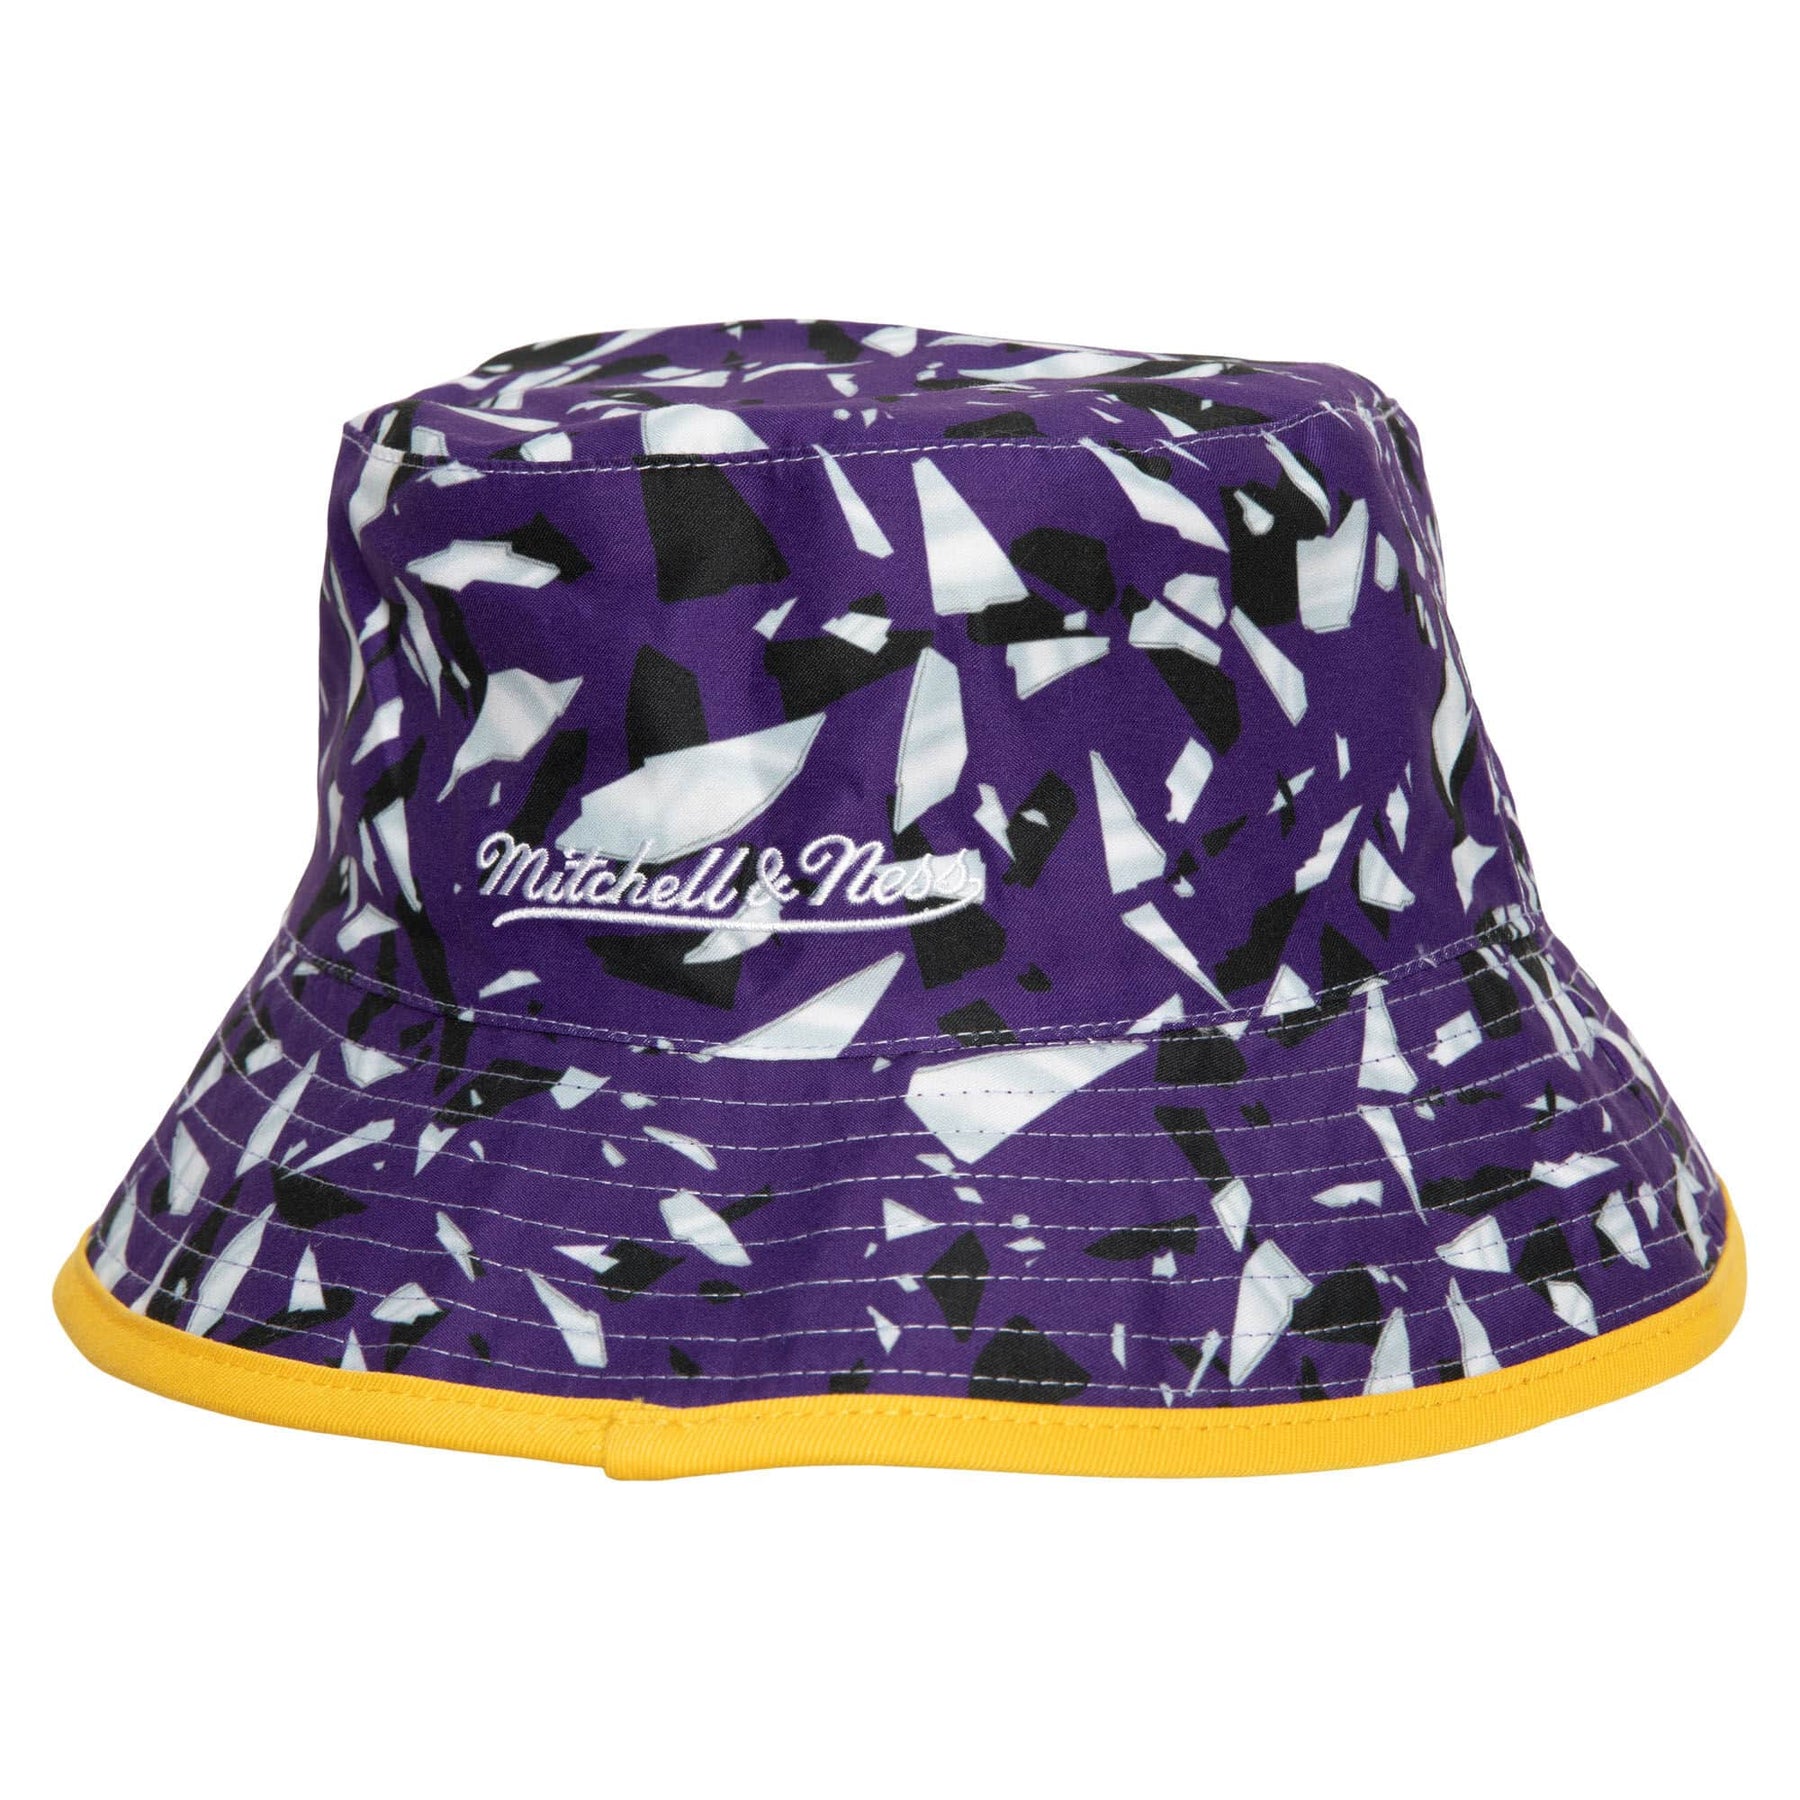 New Era - Los Angeles Lakers City Transit Bucket Hat  HBX - Globally  Curated Fashion and Lifestyle by Hypebeast